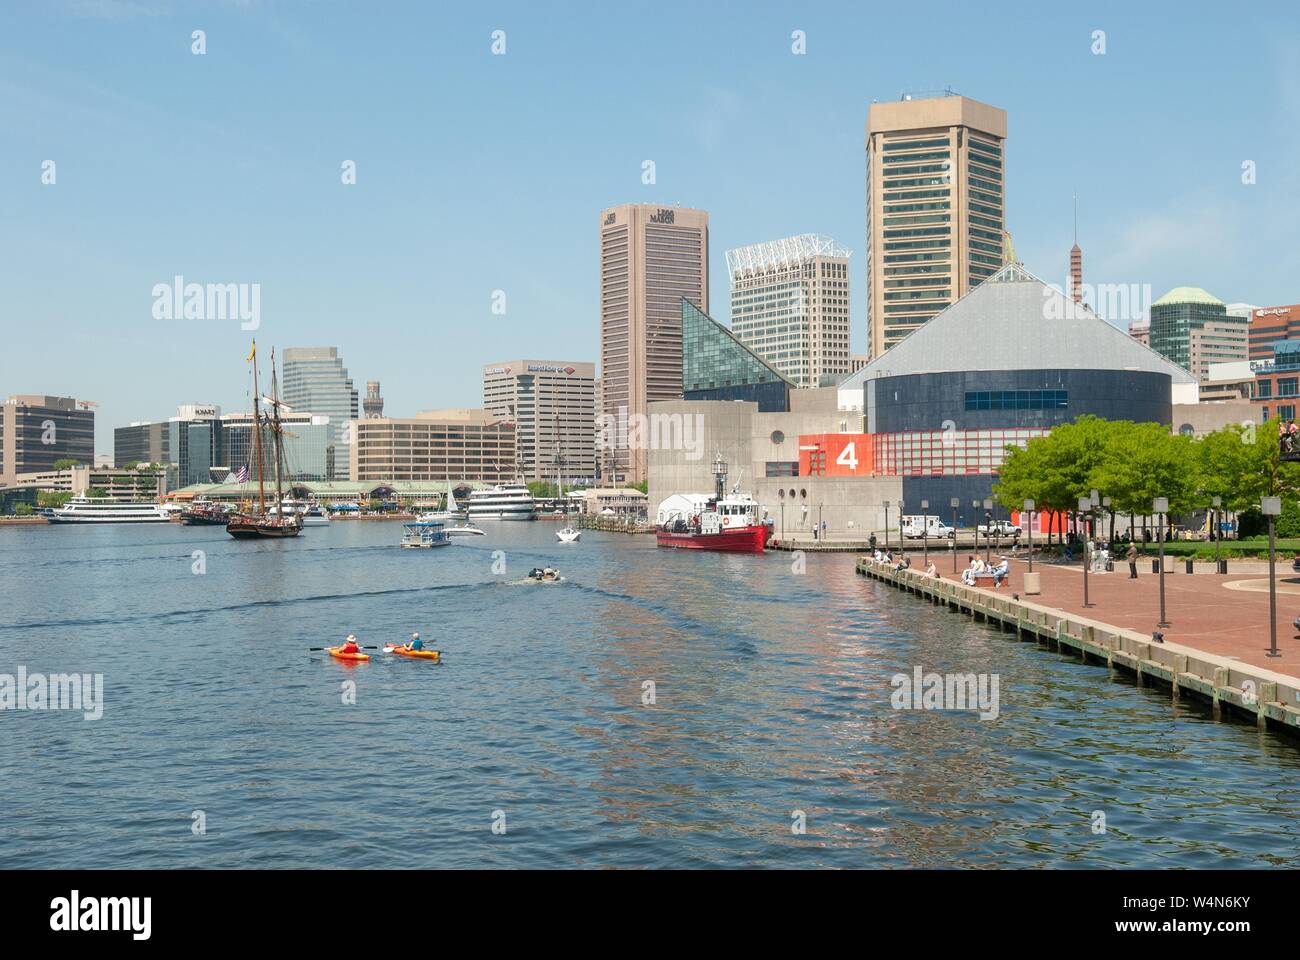 Inner Harbor and urban skyline of Baltimore, Maryland, with aquarium visible, on a sunny day, May 4, 2006. () Stock Photo